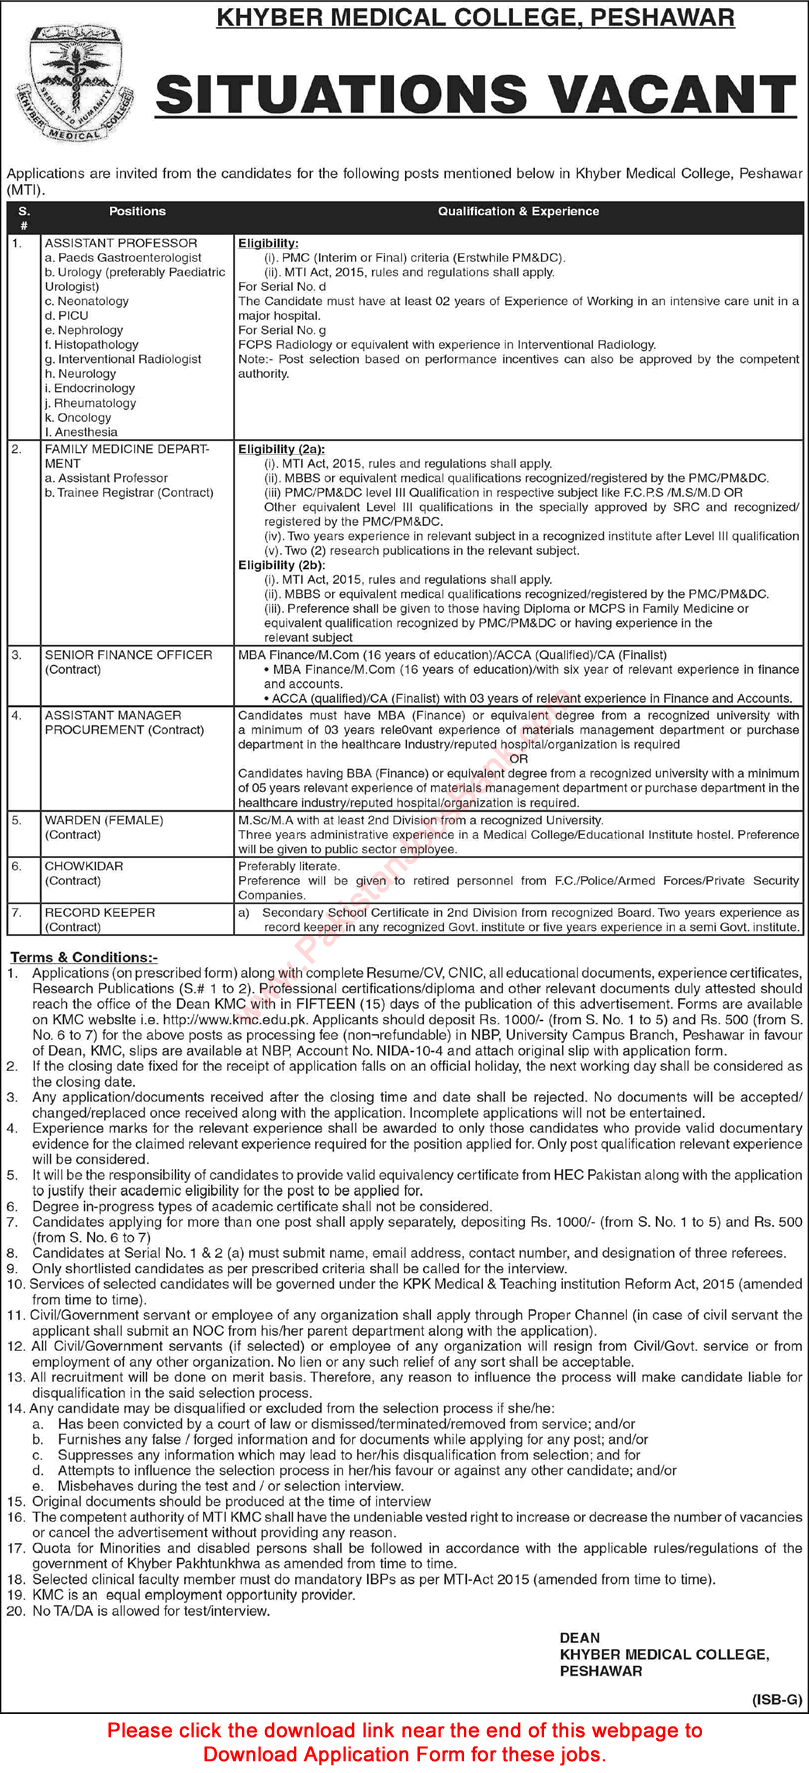 Khyber Medical College Peshawar Jobs 2021 September Application Form MTI Assistant Professors & Others Latest